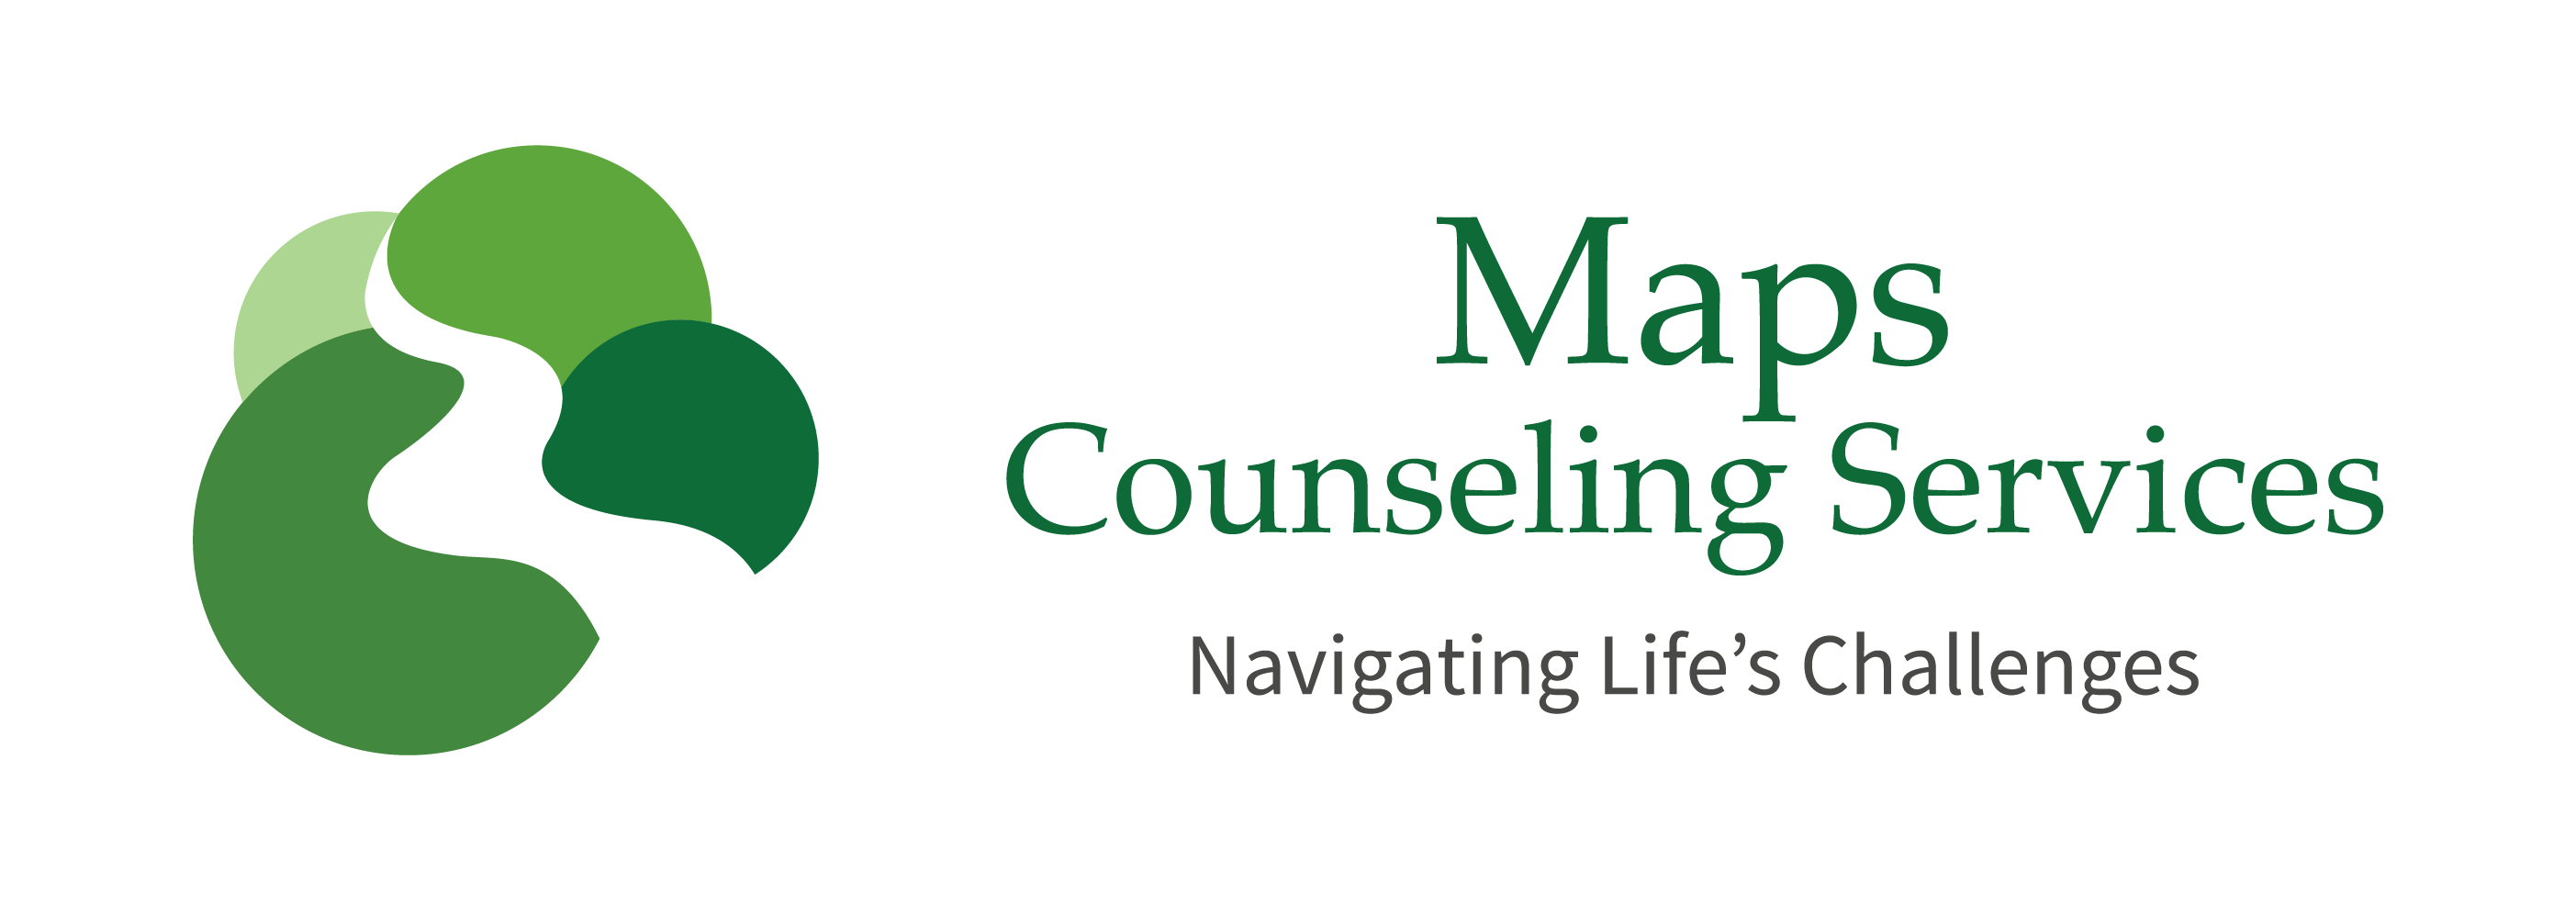 Maps Counseling Services logo